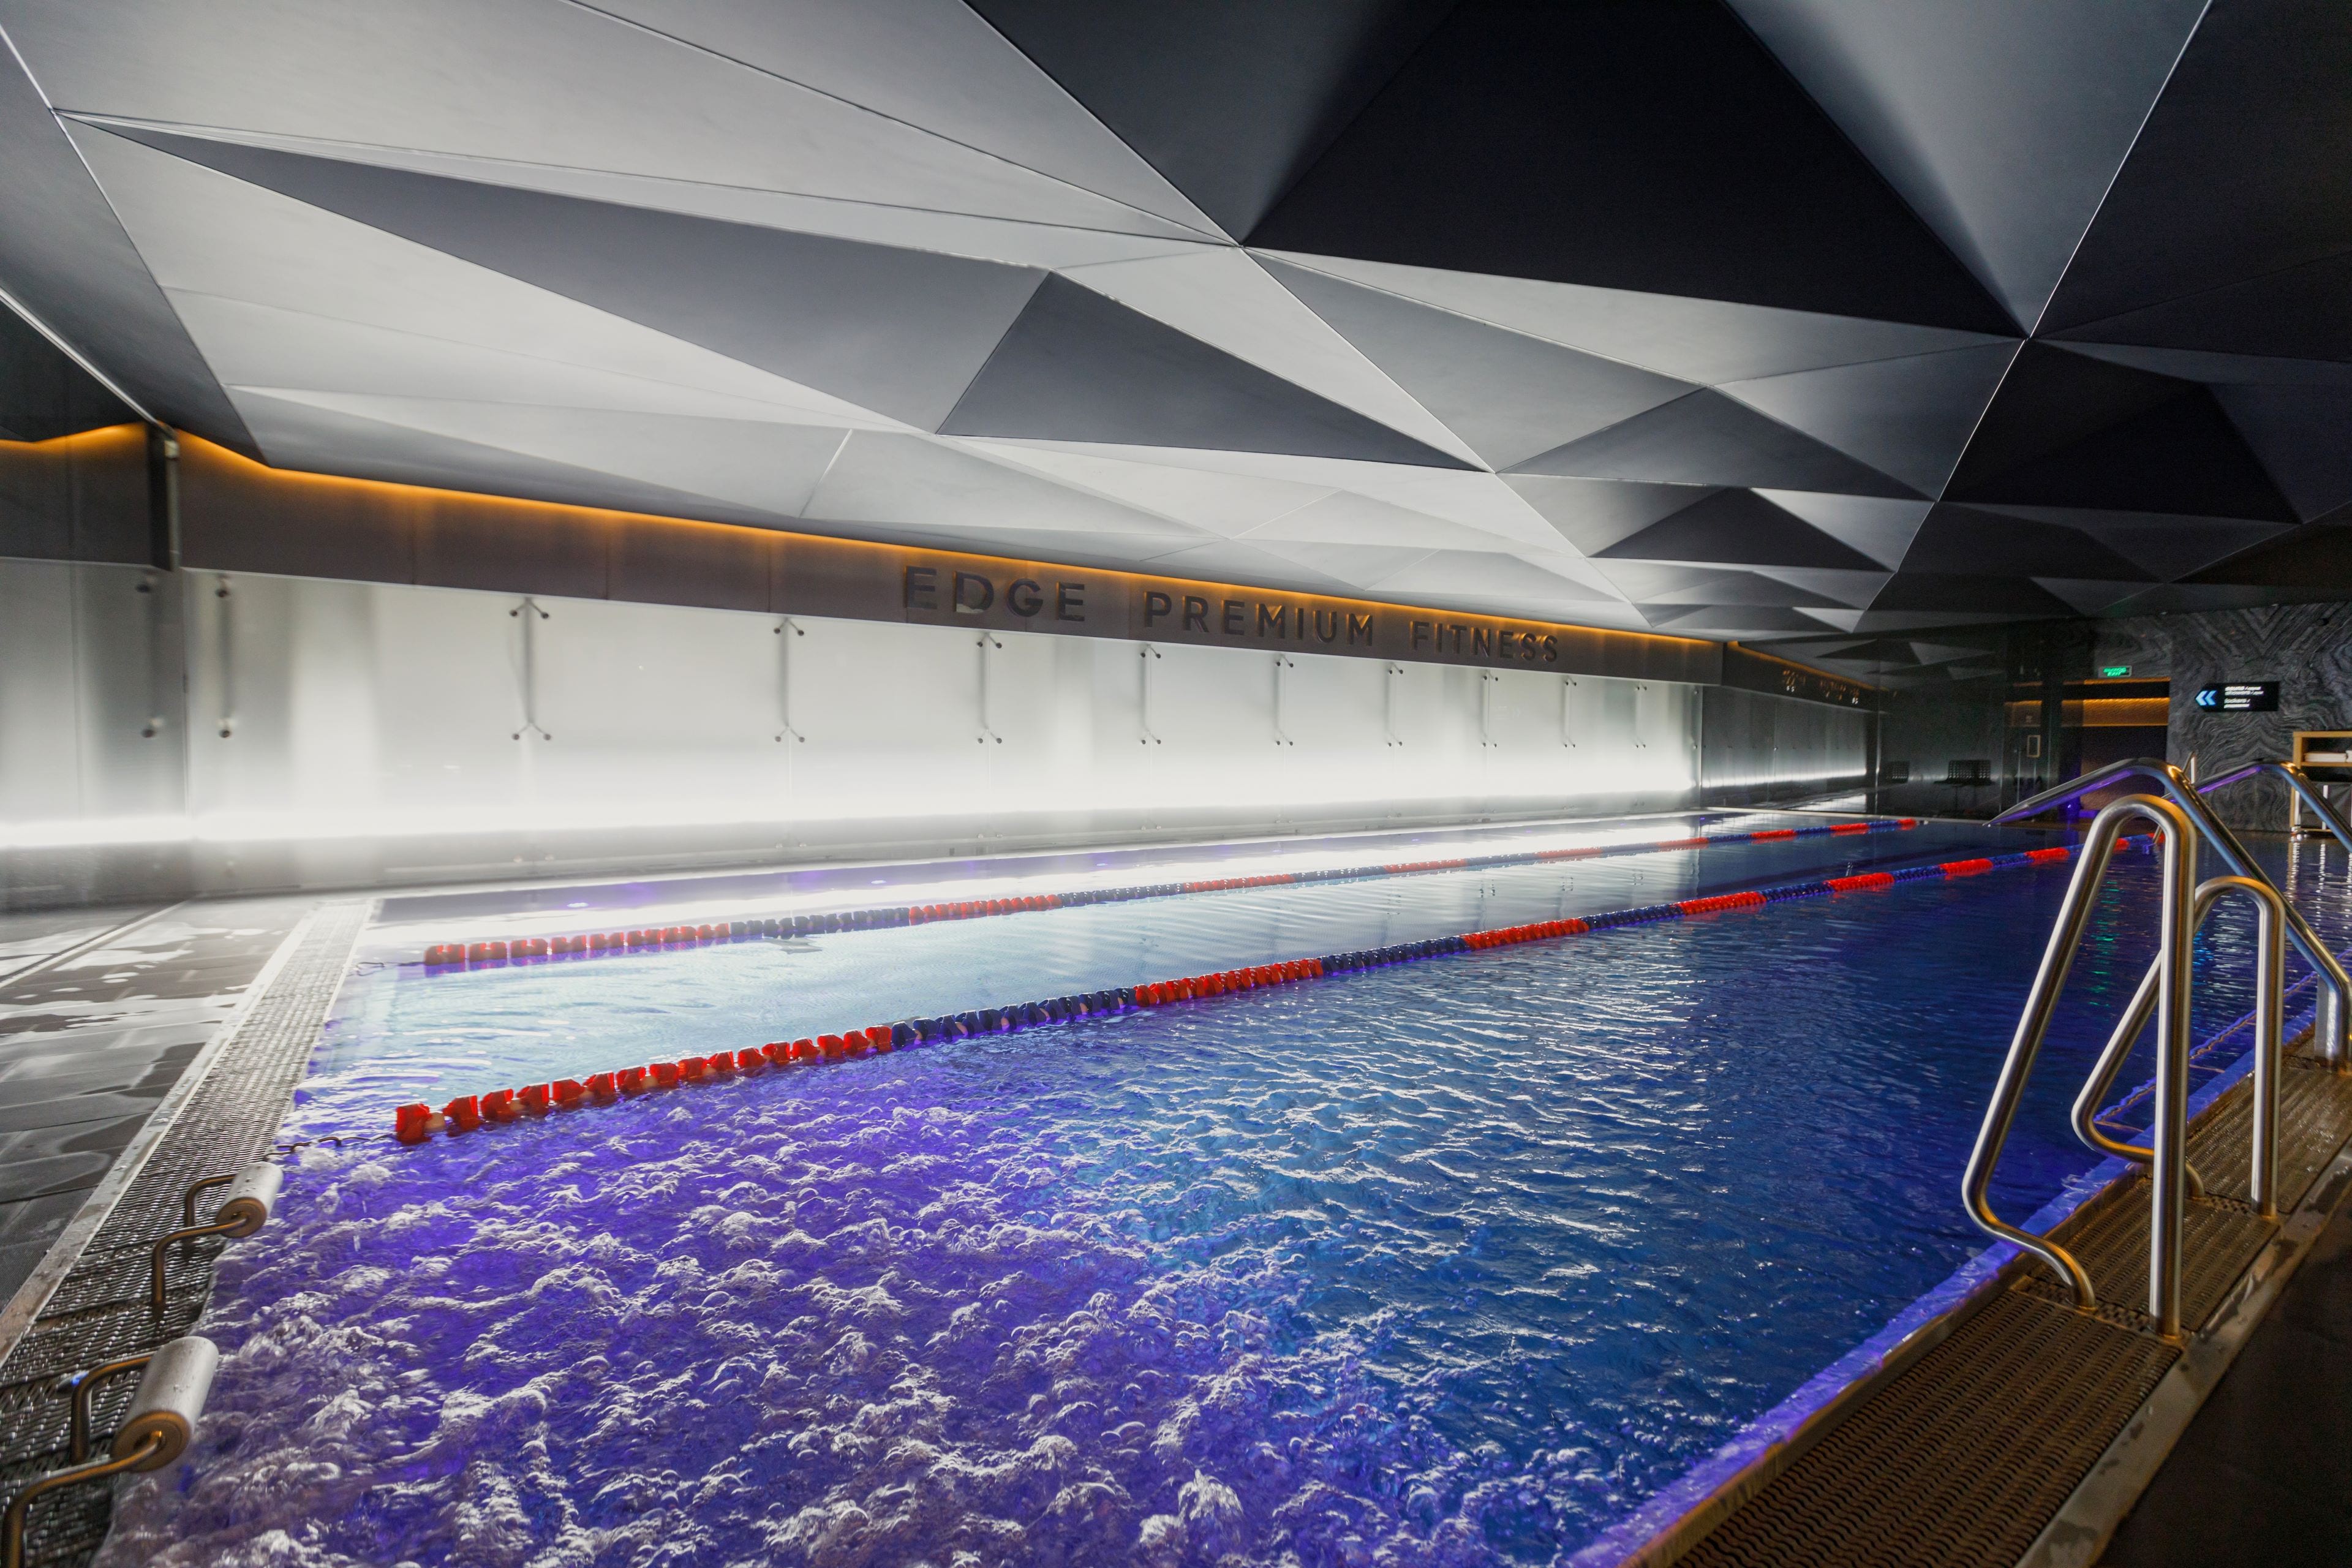 Commercial IMAGINOX Stainless-Steel Pool at the Edge Premium Wellness in Novosibirsk